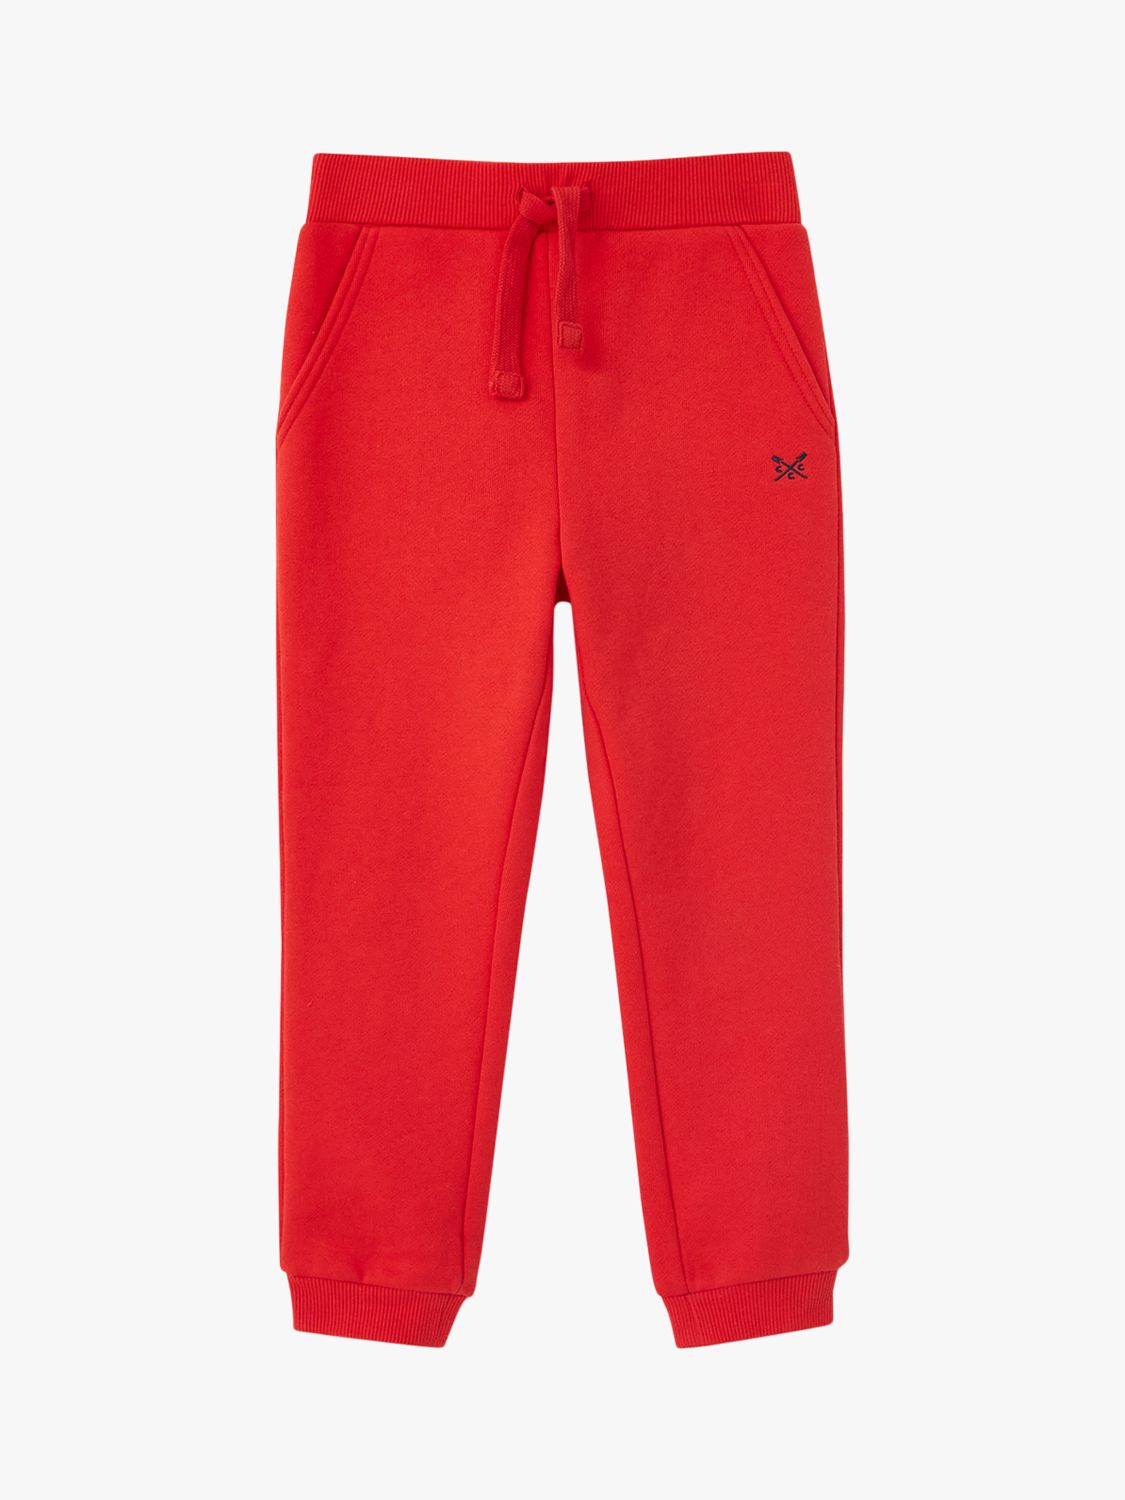 Crew Clothing Kids' Joggers, Bright Red at John Lewis & Partners